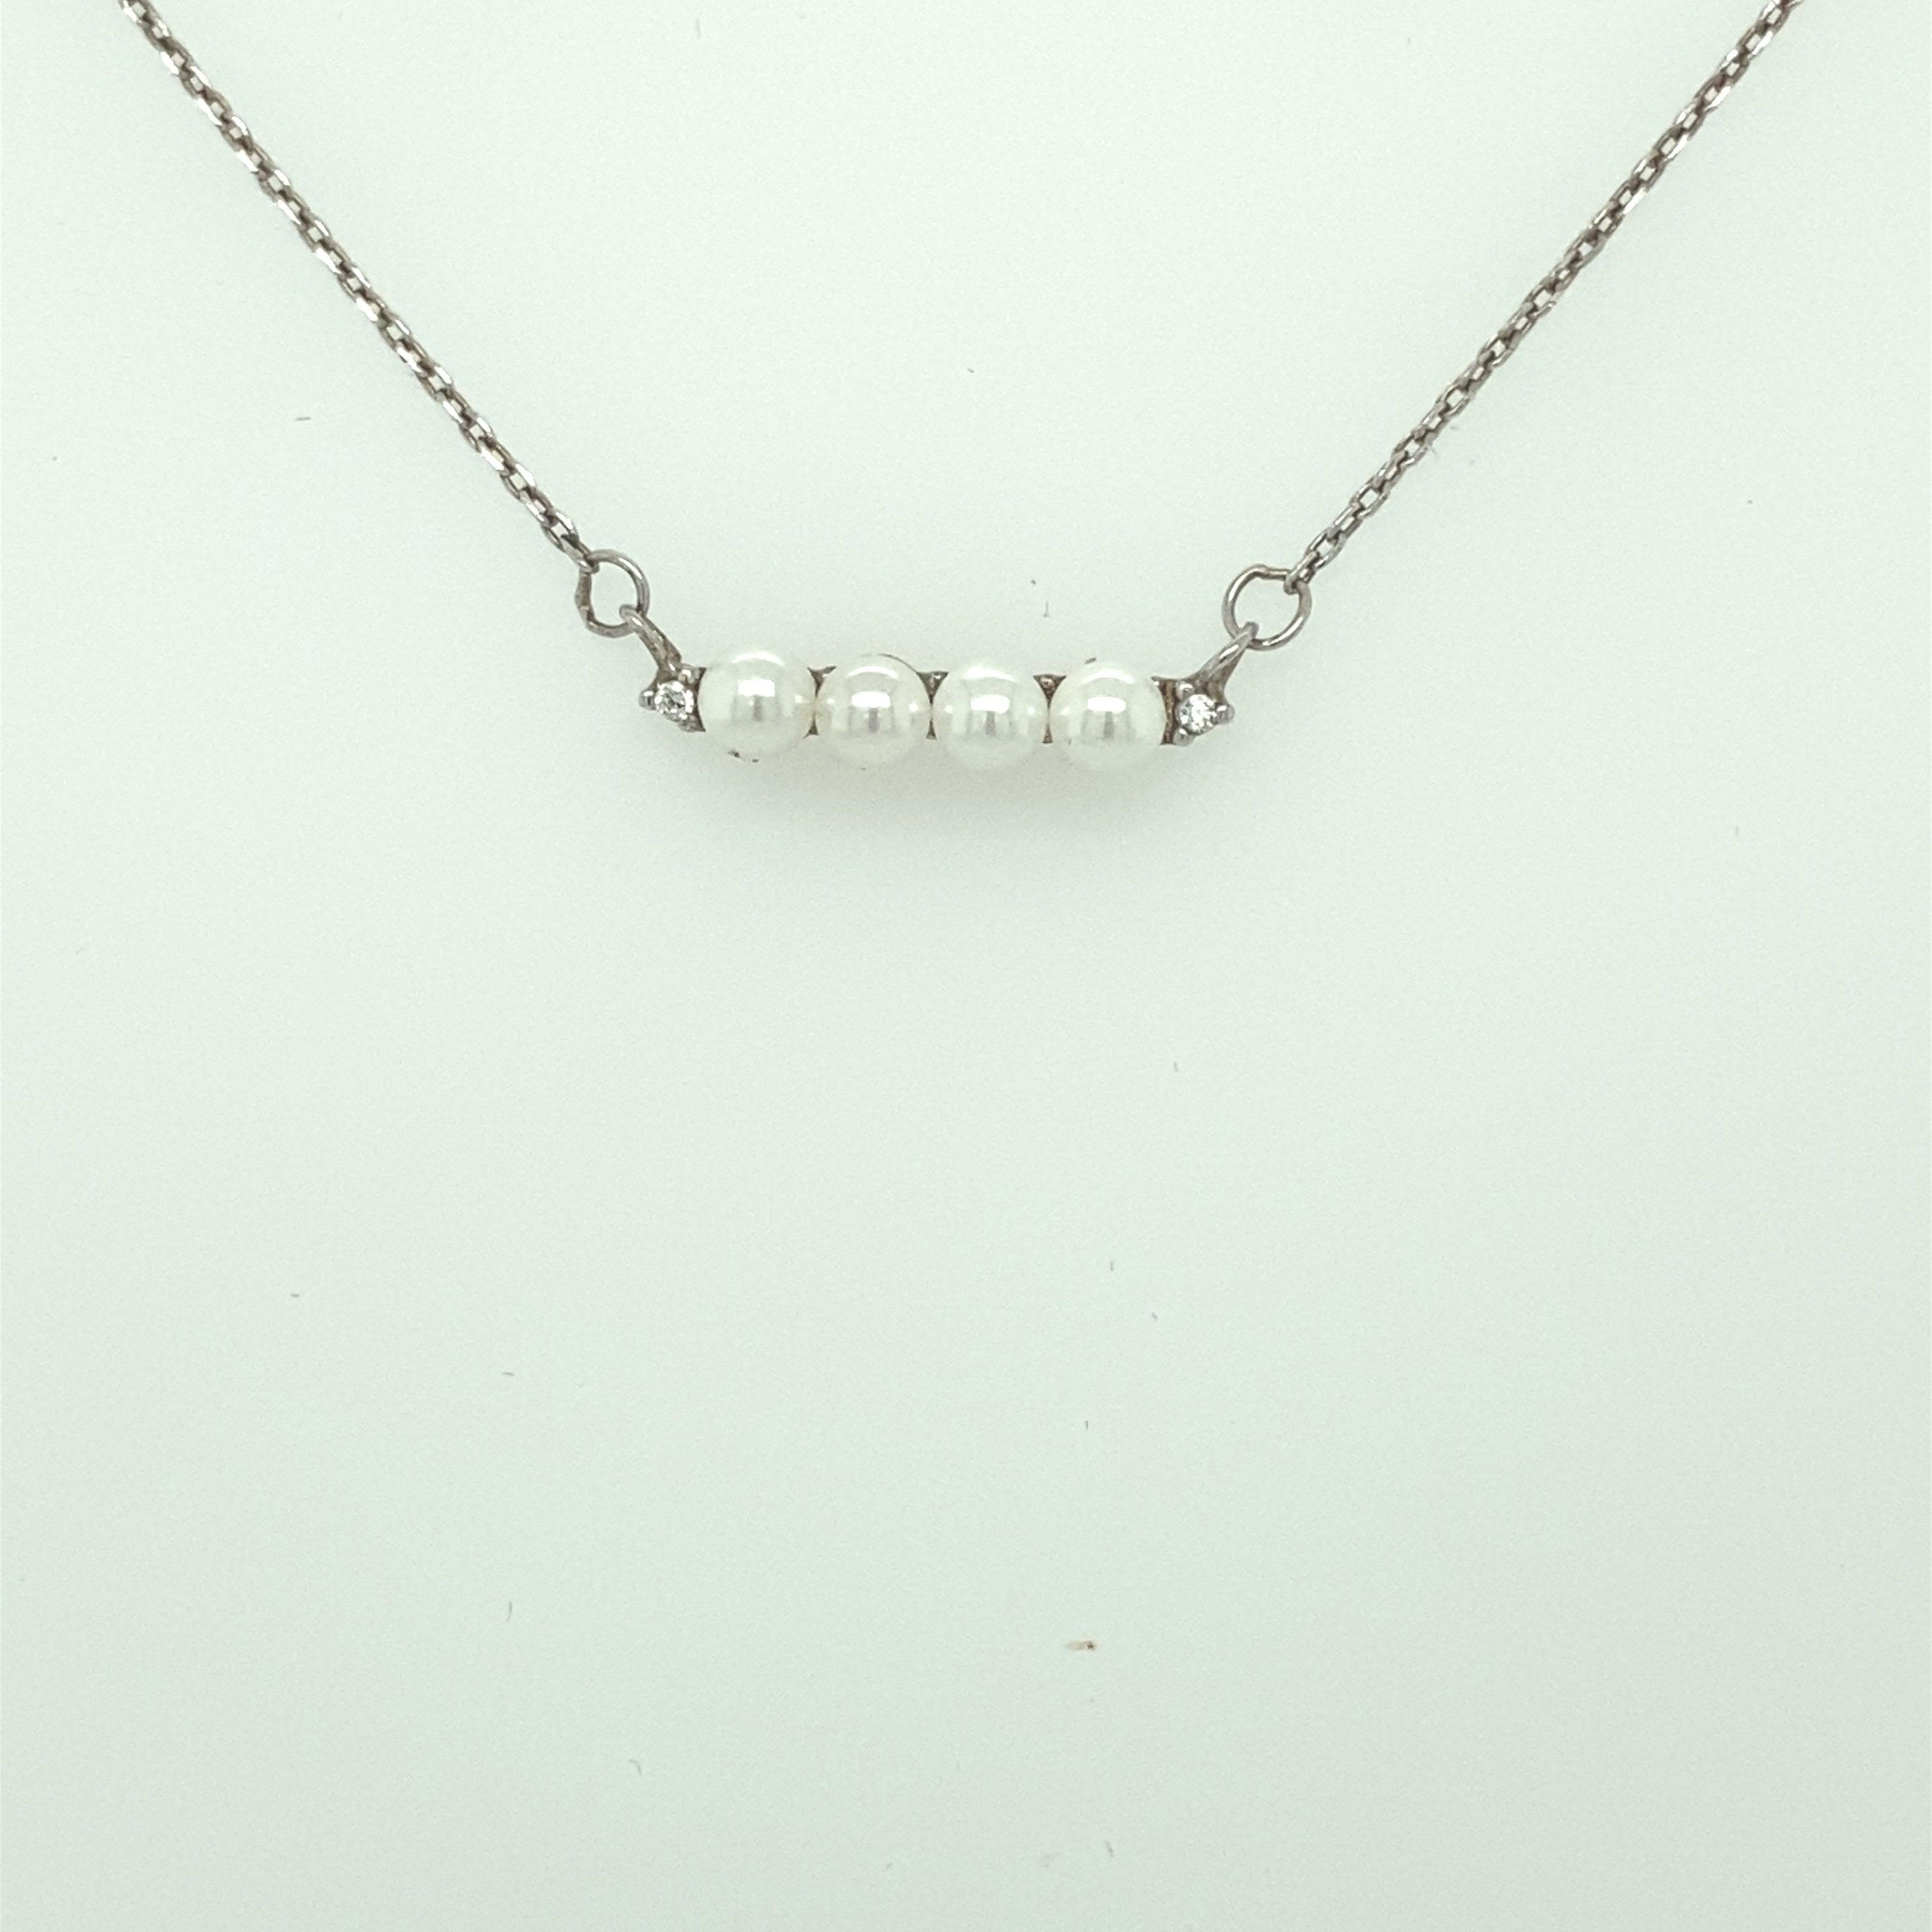 Necklace n1254 - 925 Sterling Silver - Asfour Crystal